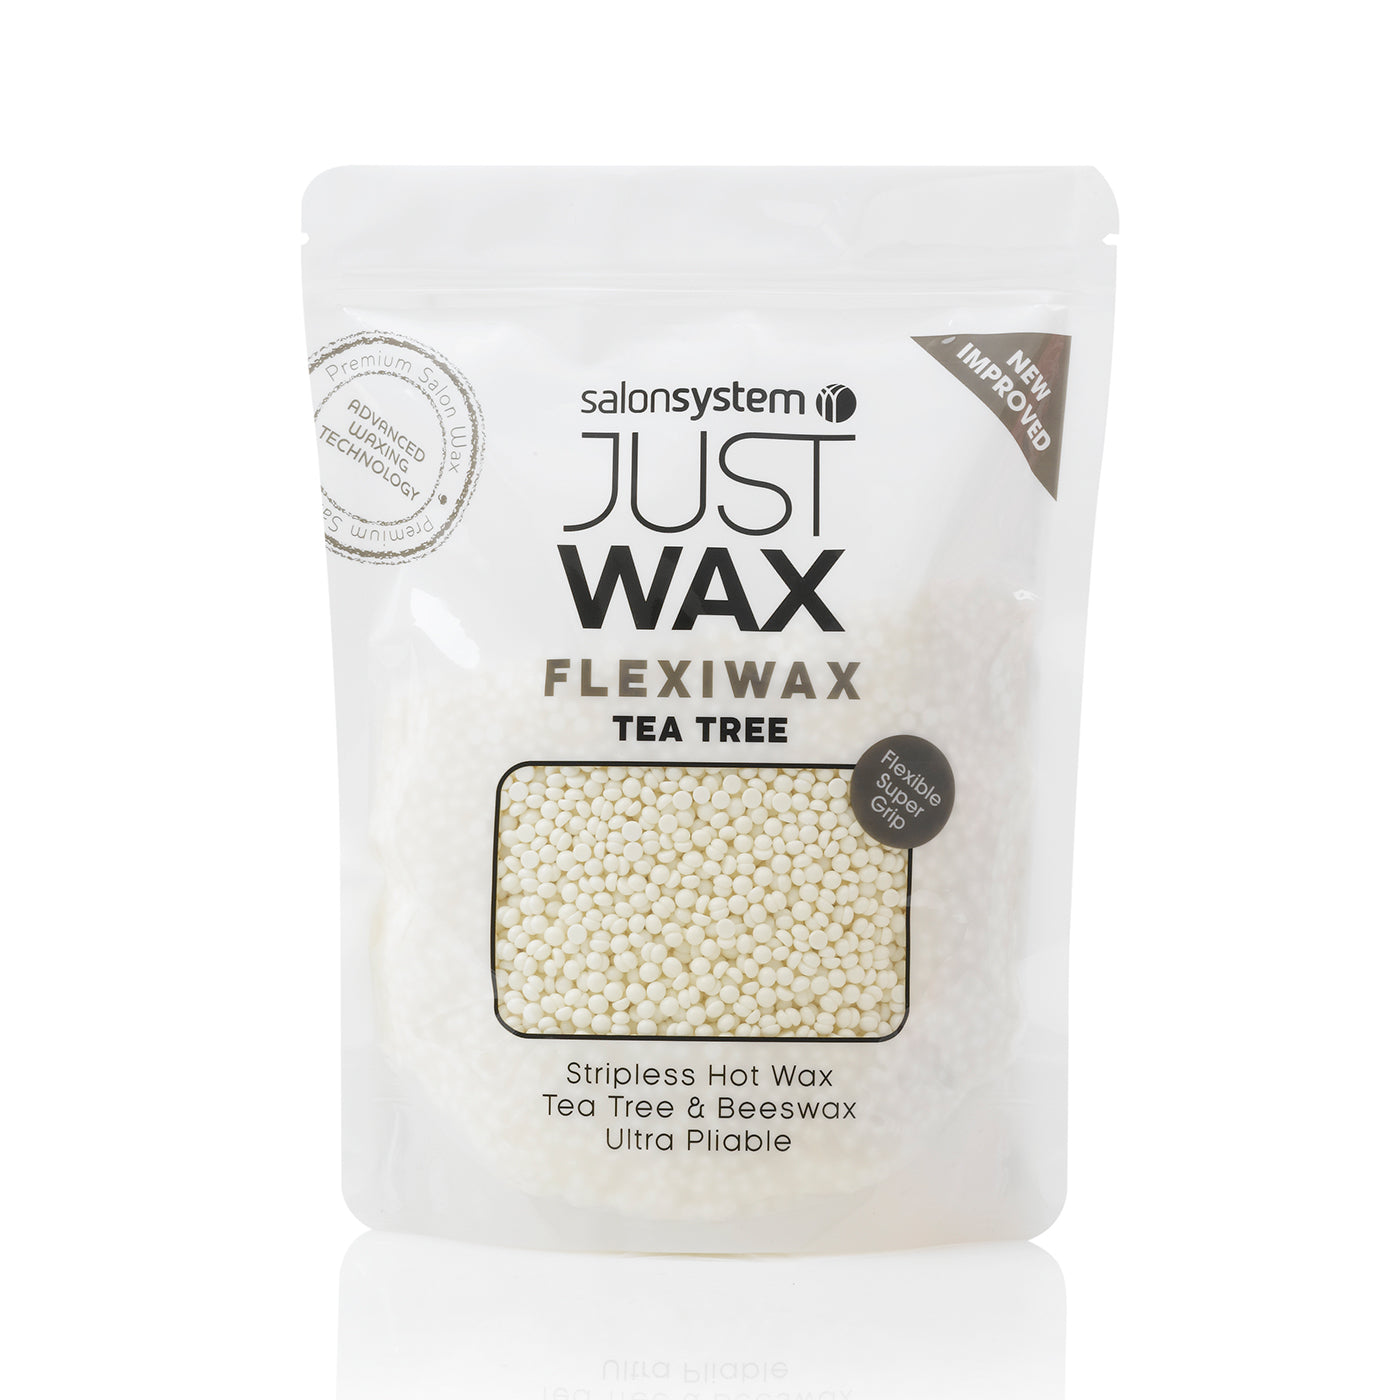 Just Wax Tea Tree Flexiwax Beads (700g) - Ultimate Hair and Beauty